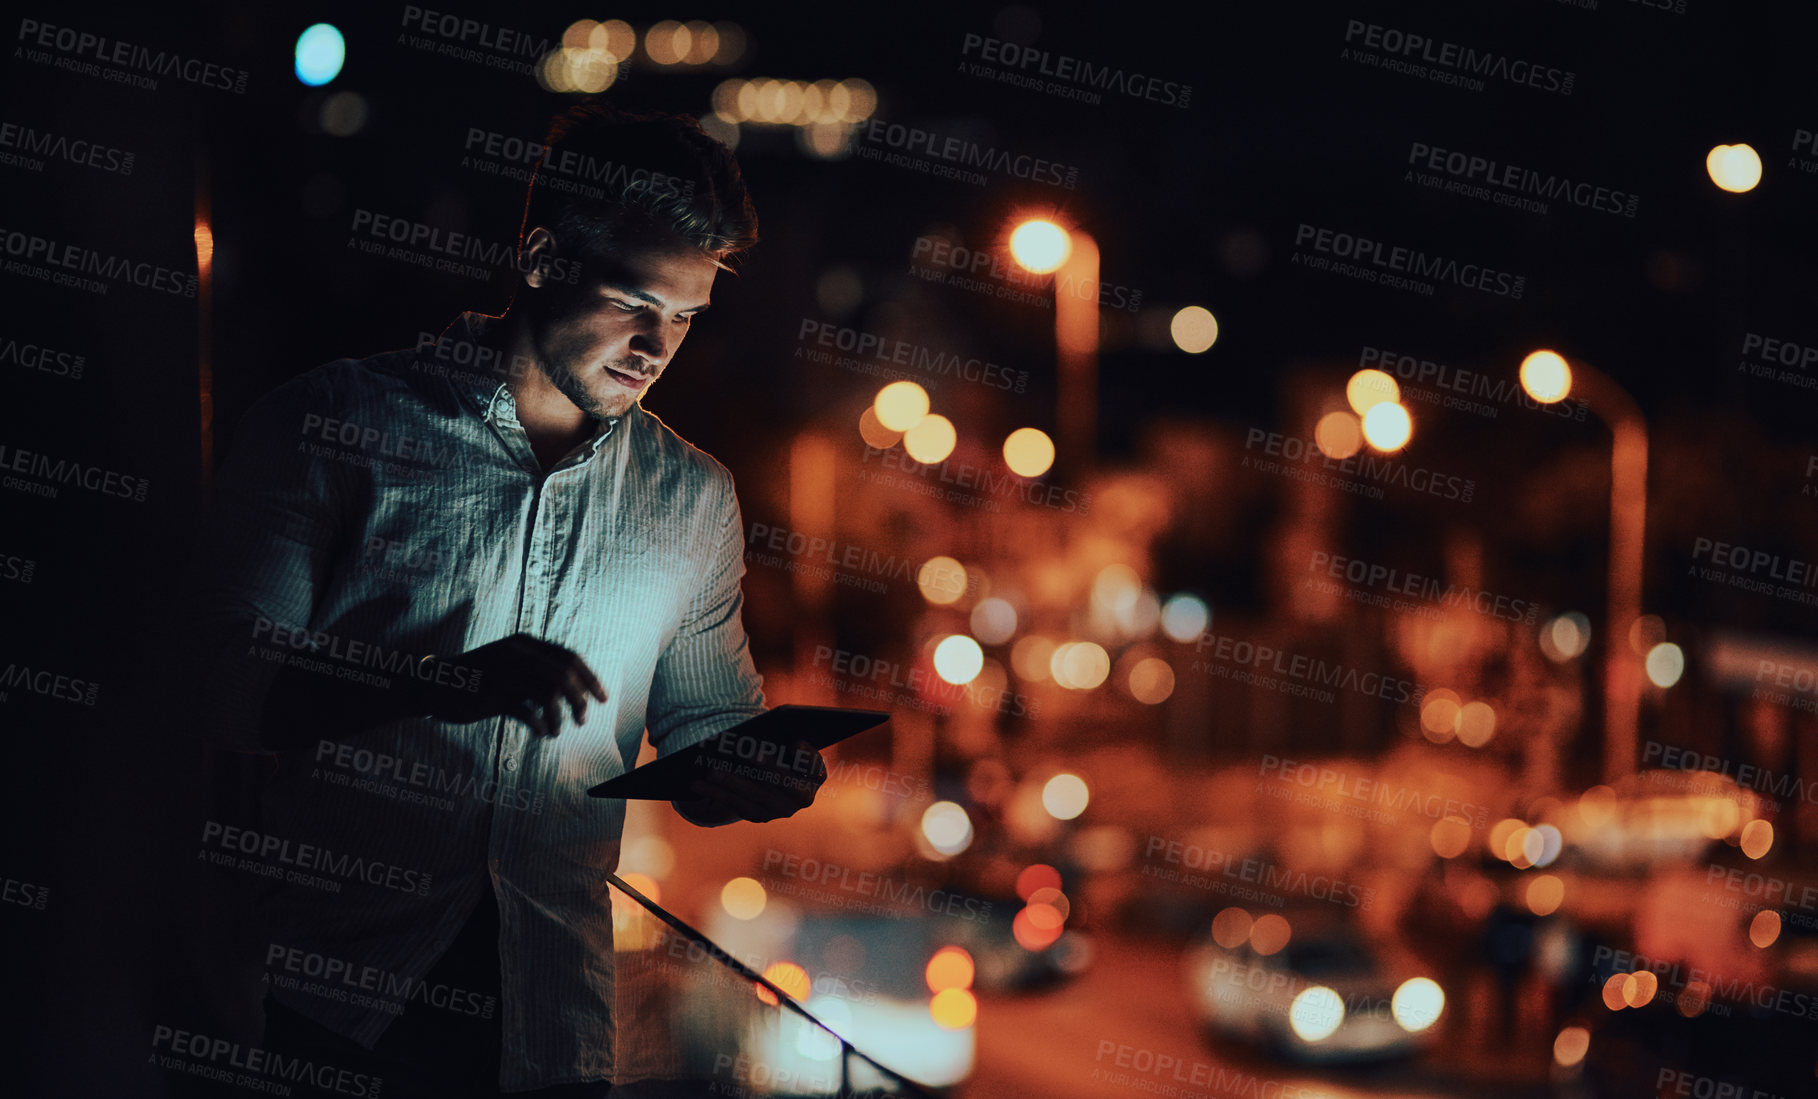 Buy stock photo Shot of a young businessman using a digital tablet outside an office at night